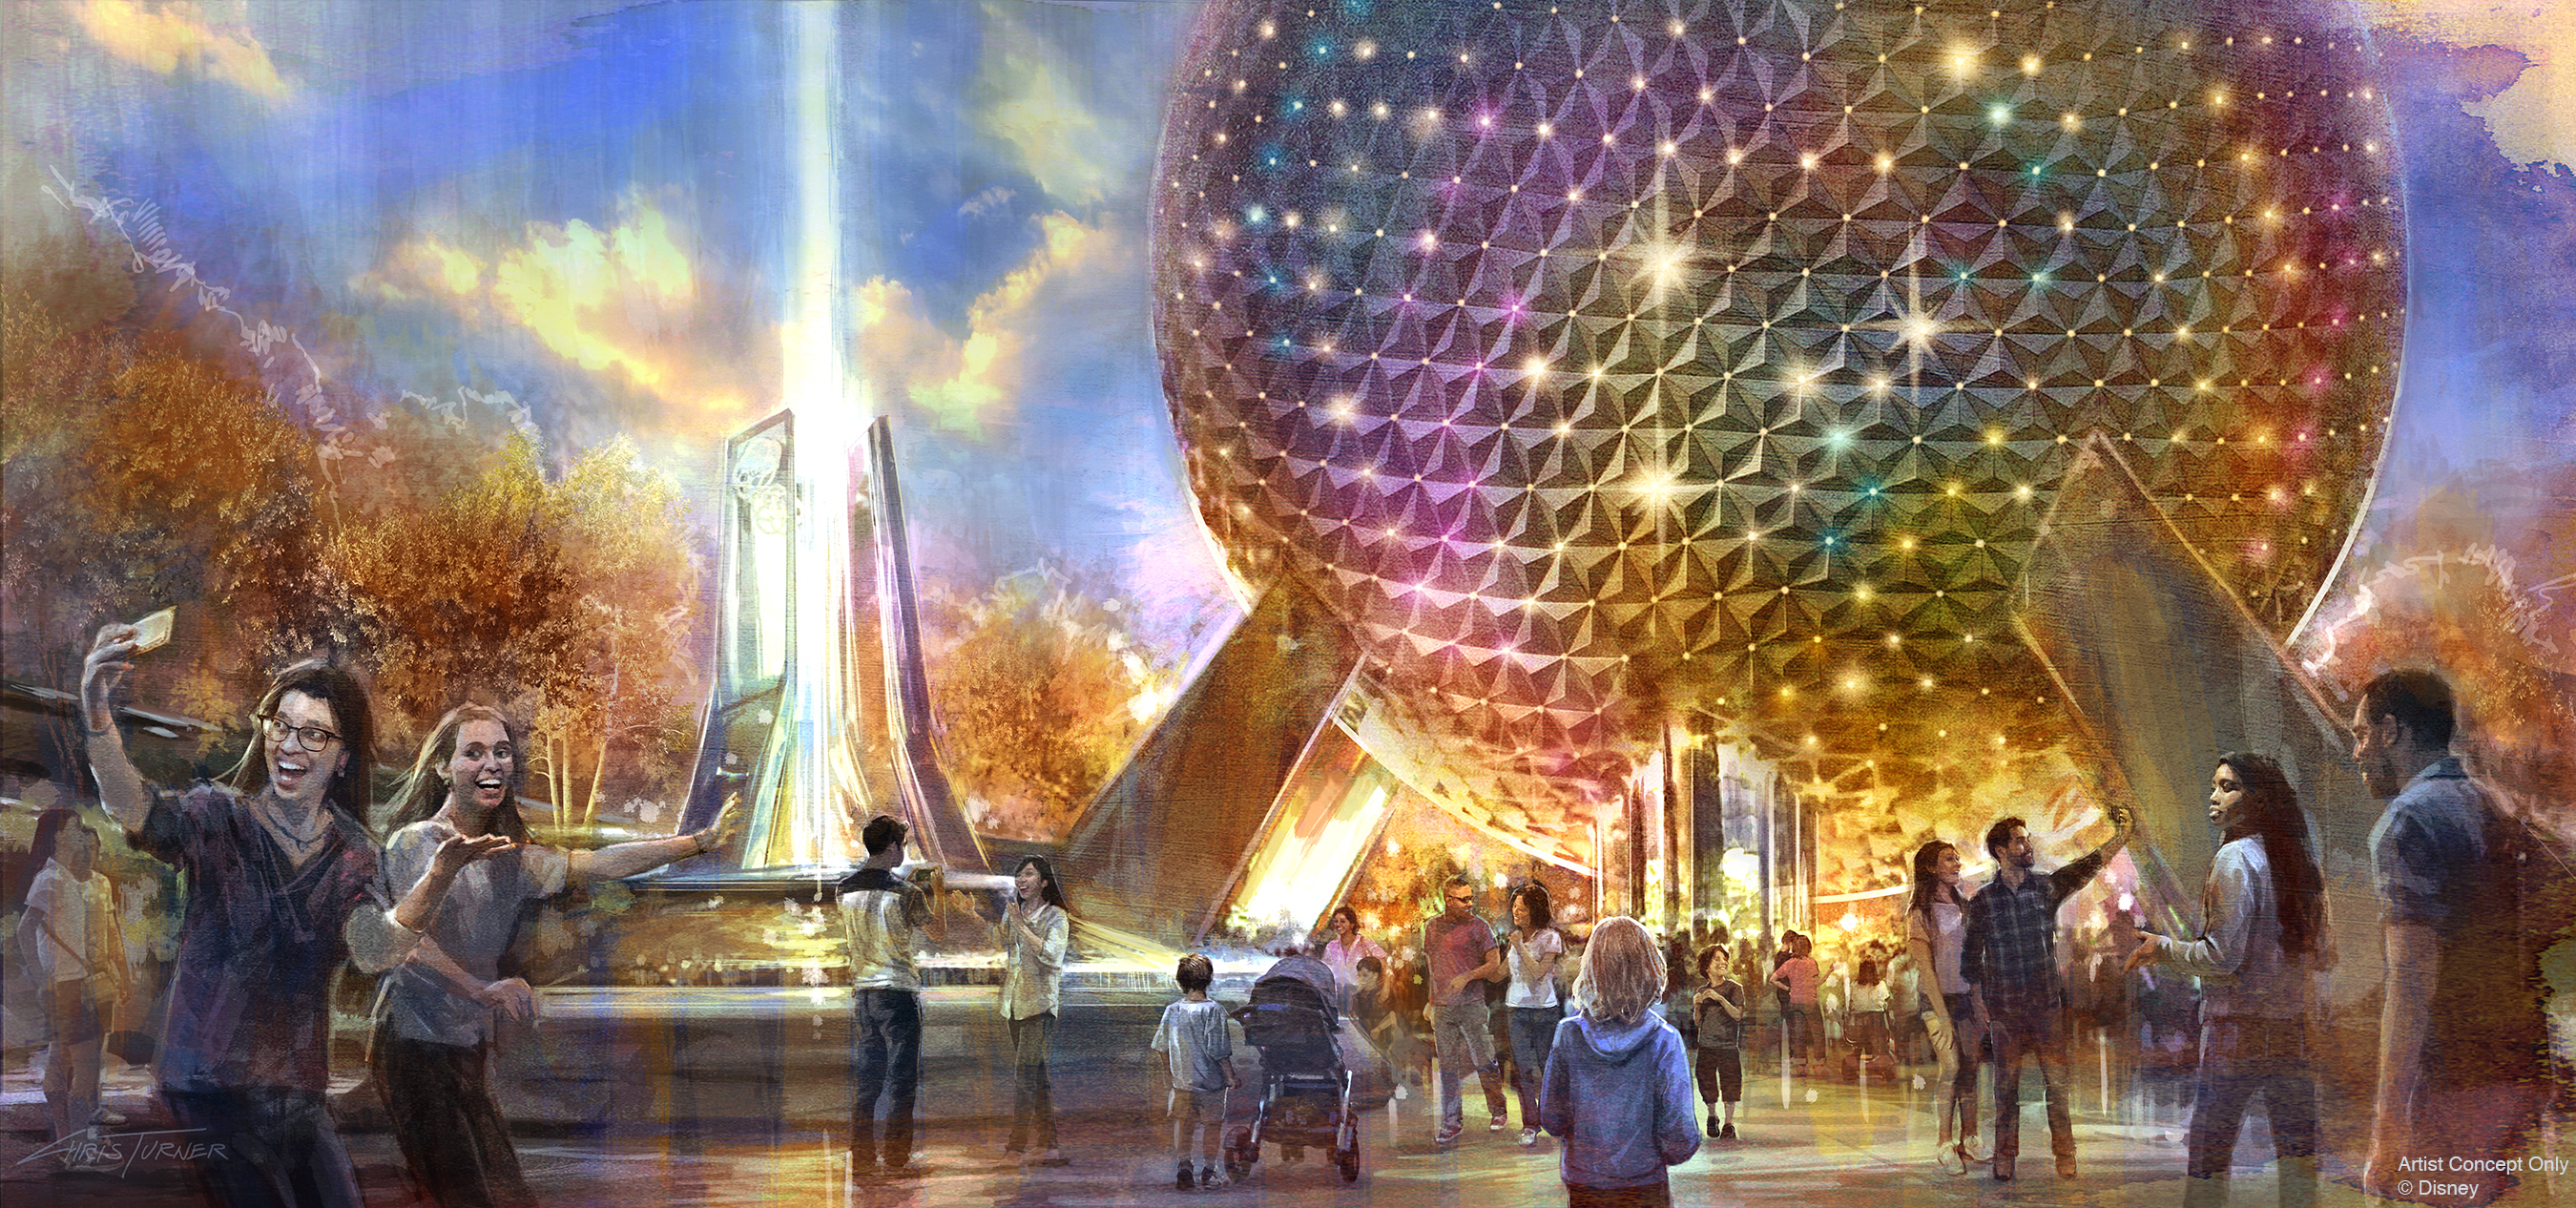 PHOTOS New concept art shows more of Epcot's redesign including new